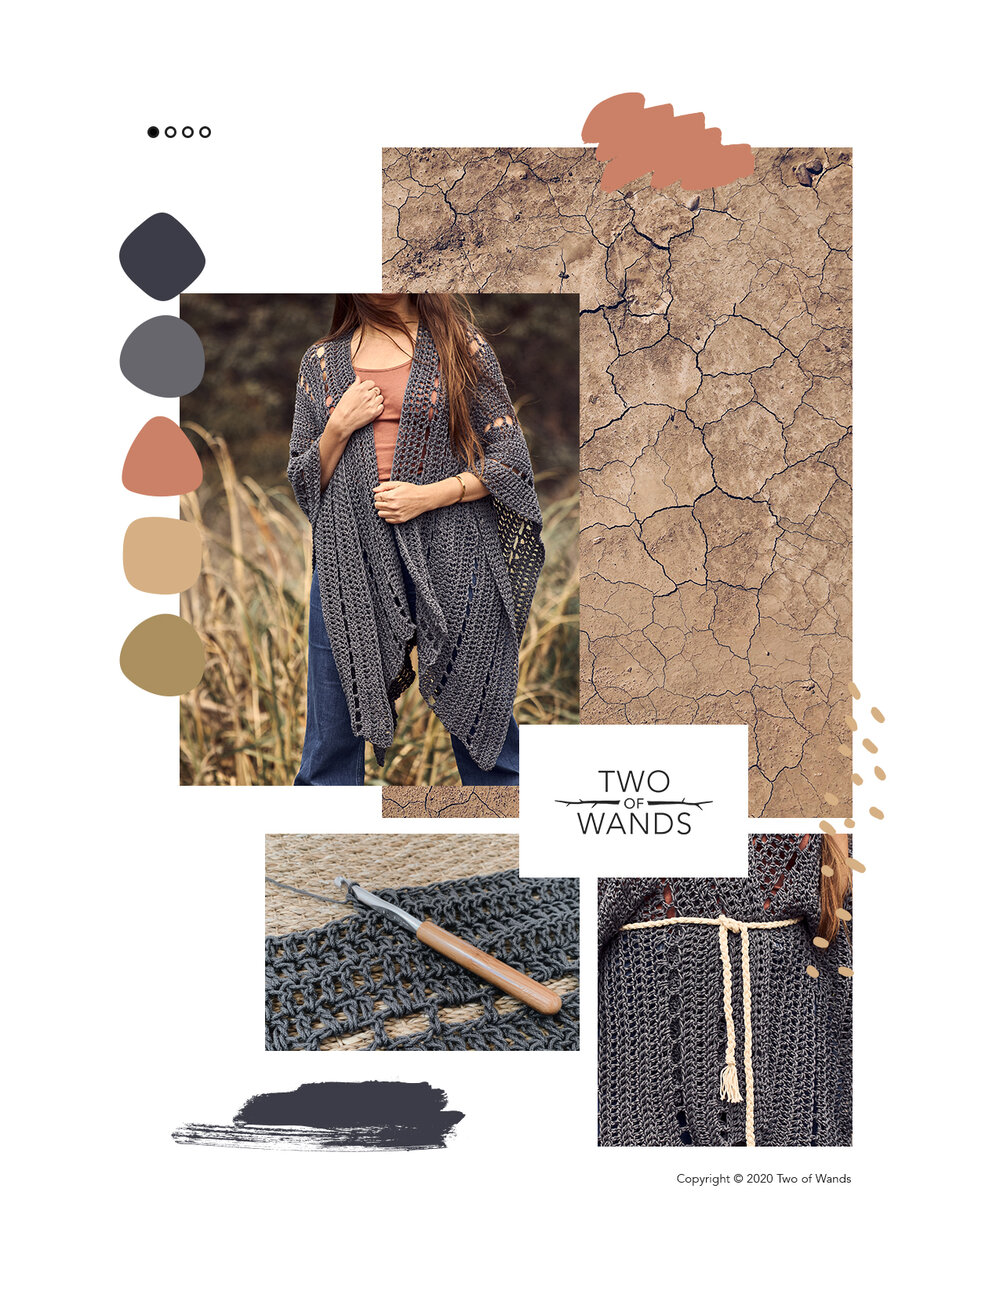 Summer Safari Collection by Two of Wands